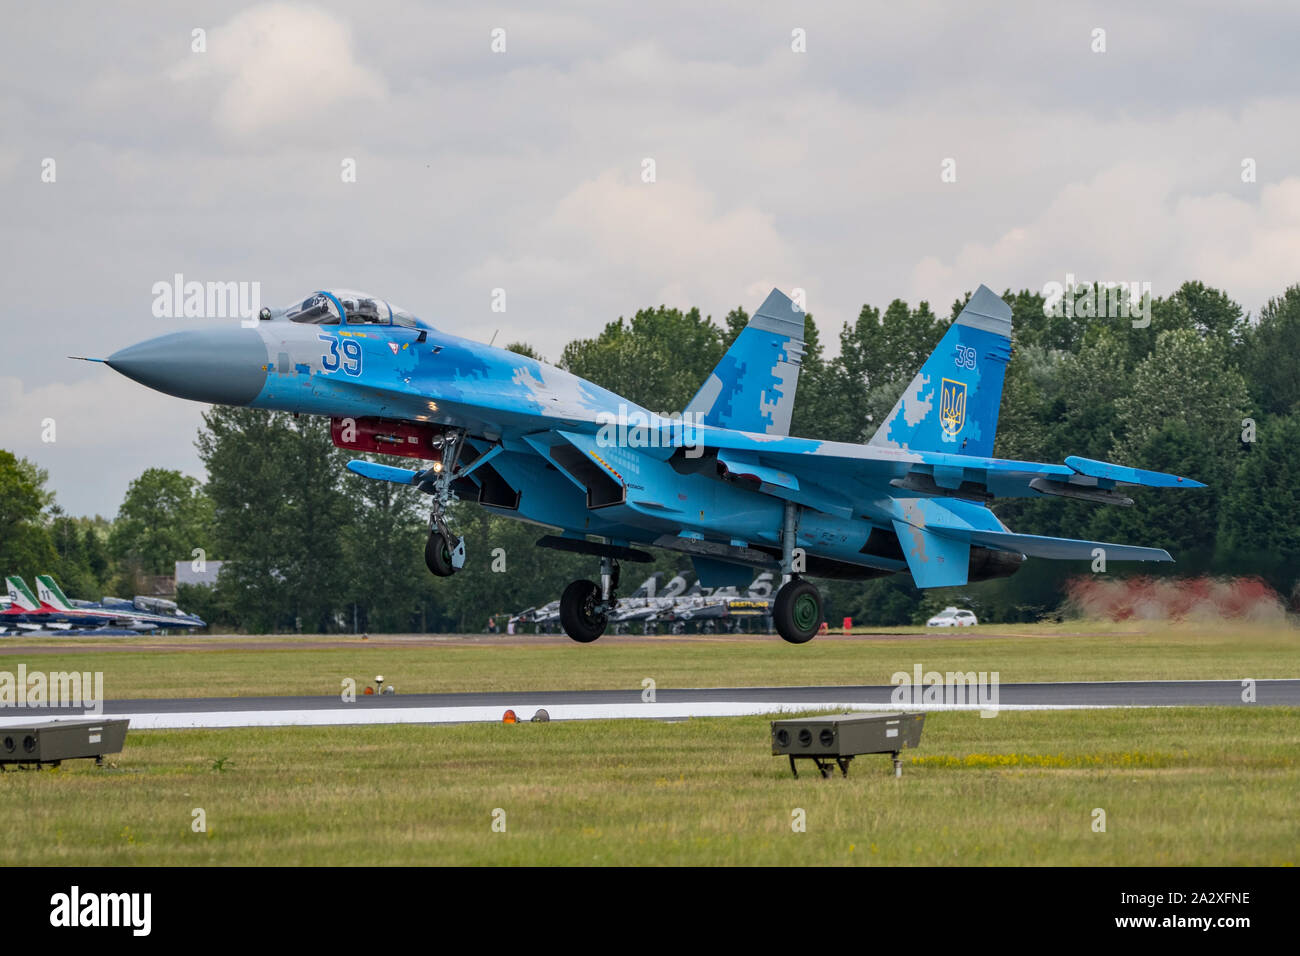 A Ukrainian Air Force Sukhoi SU-27P fighter aircraft about to land after displaying at RIAT 2019 , RAF Fairford, UK on the 21st July 2019. Stock Photo